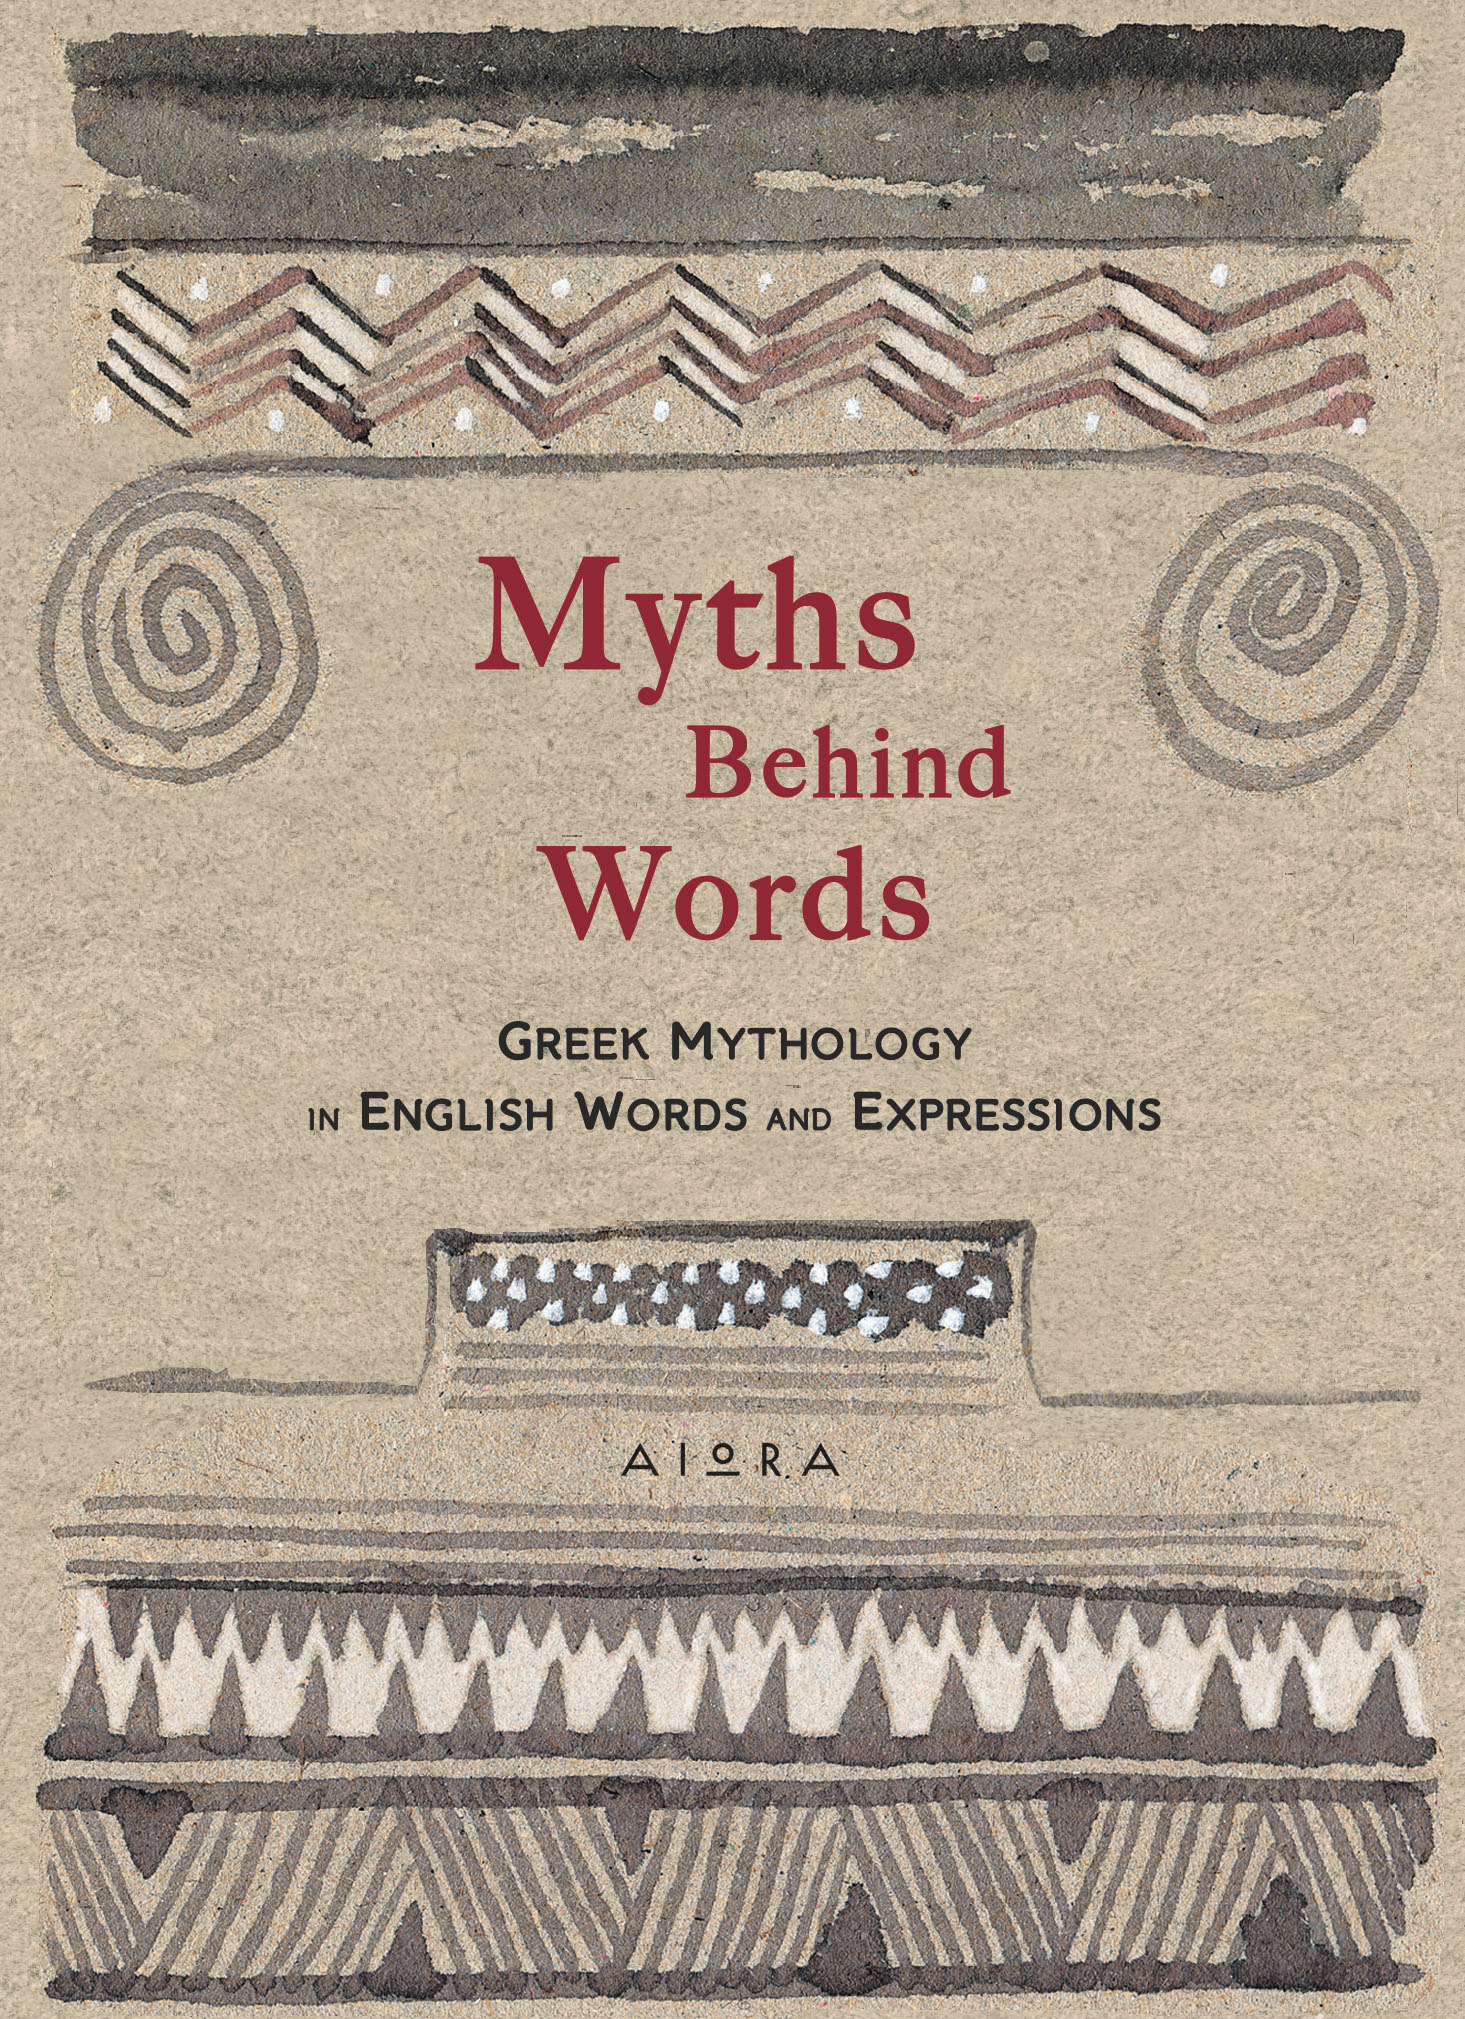 Myths behind words: Greek Mythology in English Words and Expressions